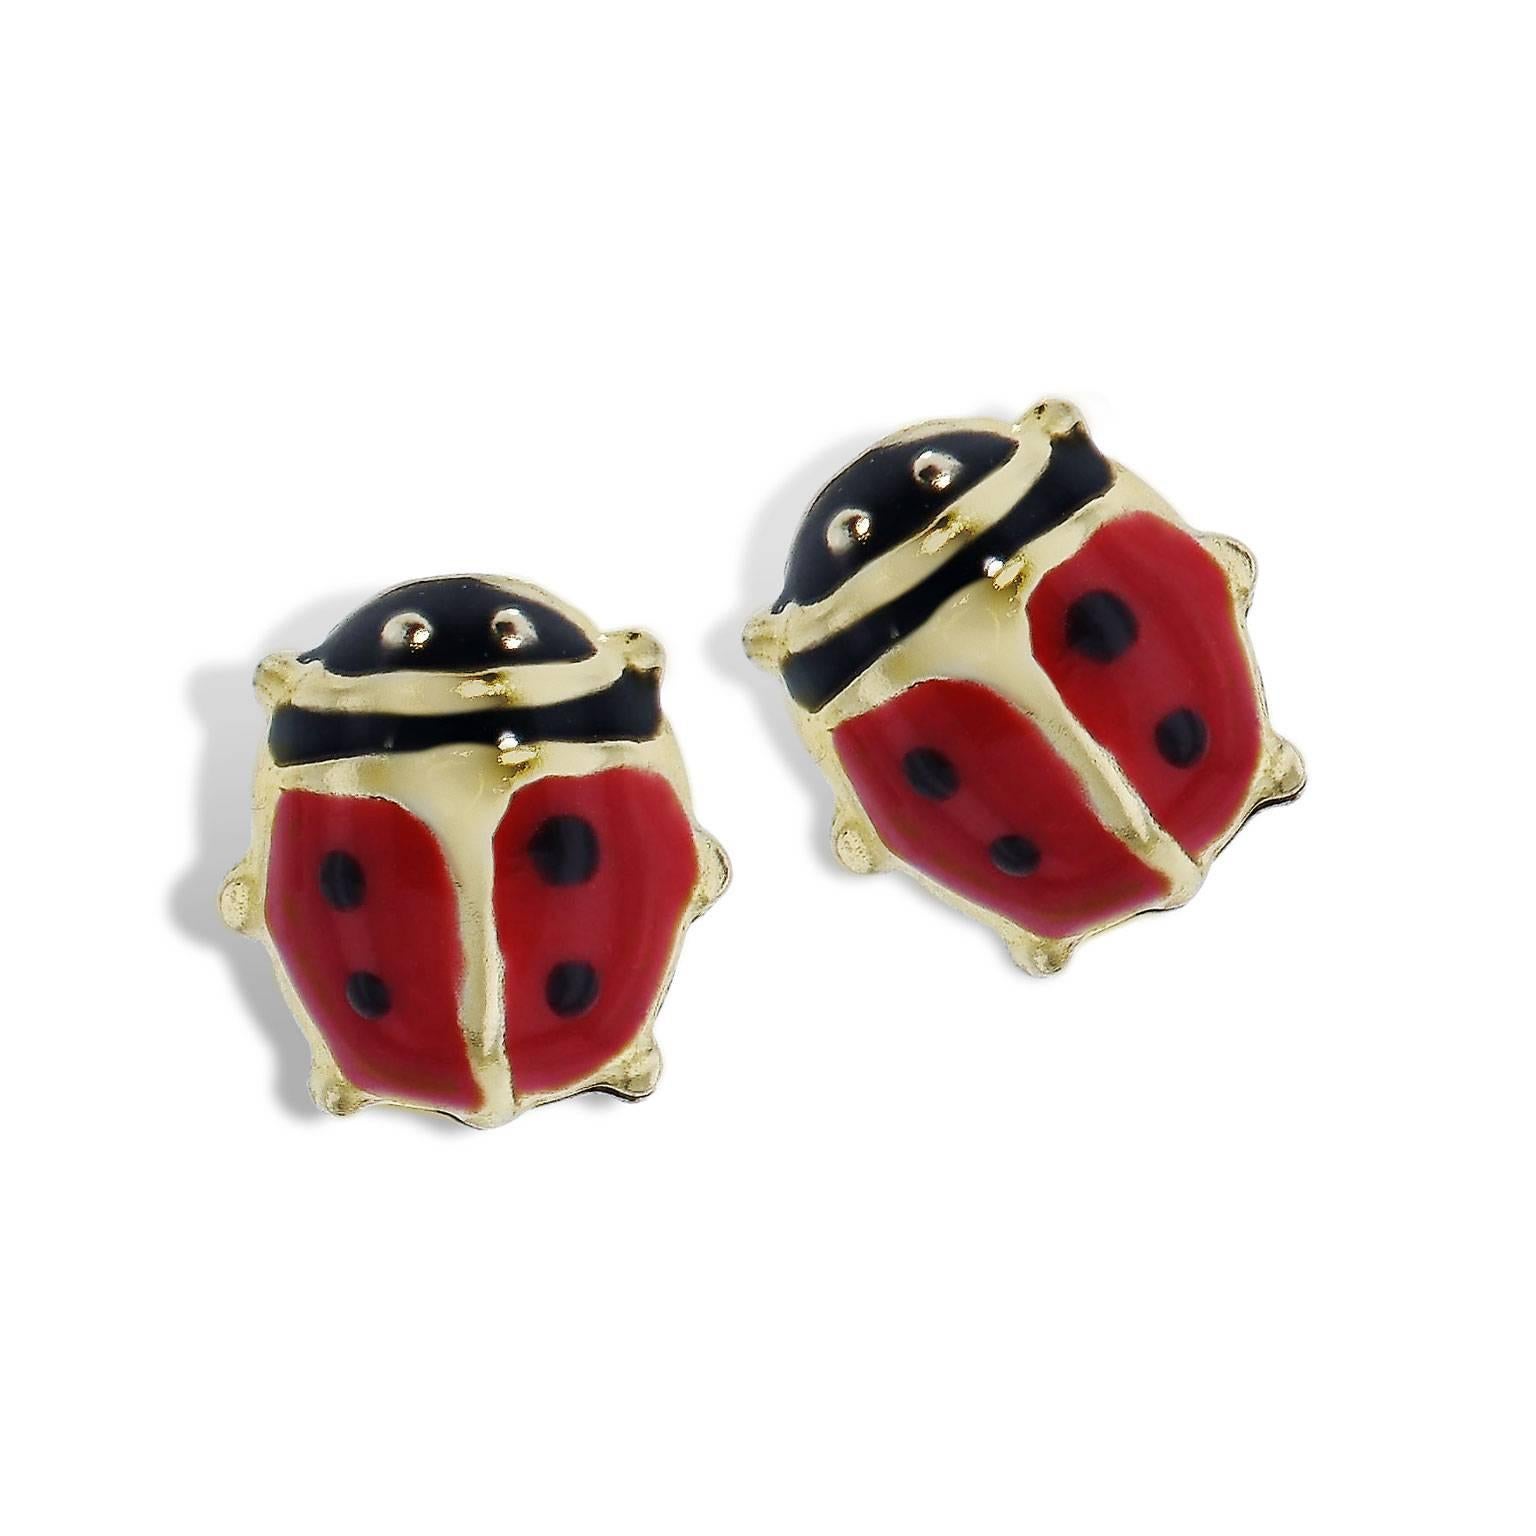 A darling pair of 18 karat yellow gold red enamel ladybug earrings to adorn the ears of your precious new addition. With 6 millimeter covered screw backs, these stud earrings wont fluttery away. 